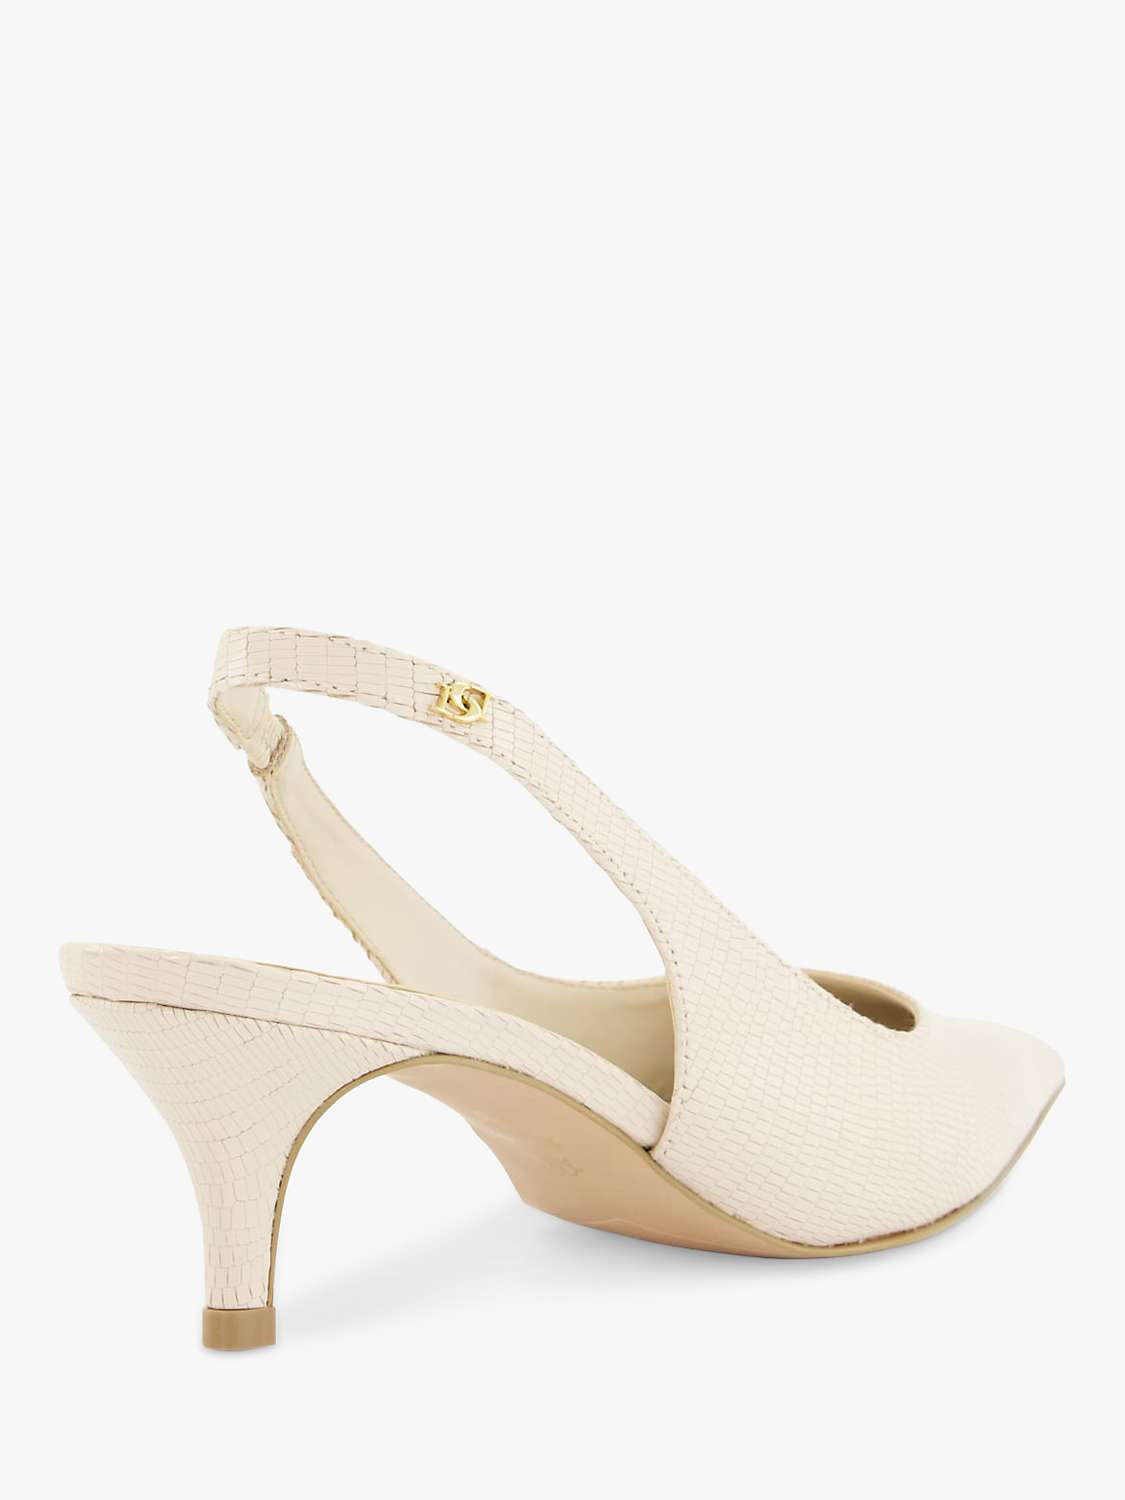 Buy Dune Capitol Leather Stiletto Heel Slingback Court Shoes Online at johnlewis.com